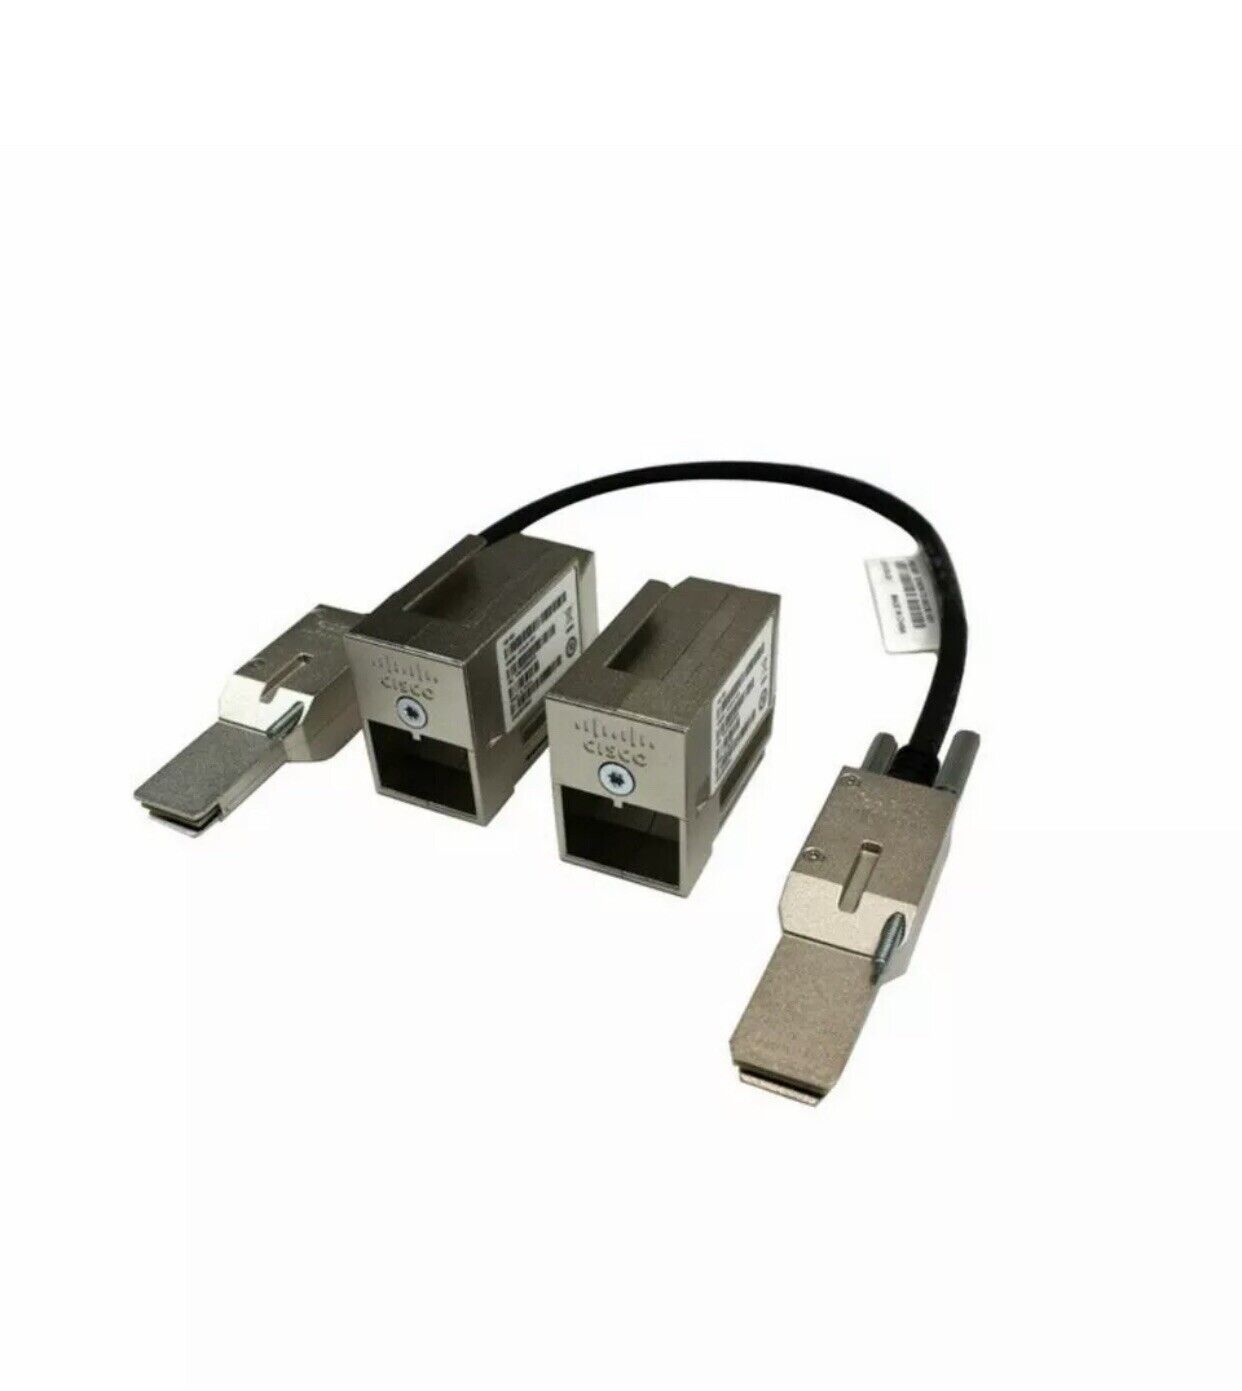 Pair Of Used Cisco C3650-STACK-KIT Catalyst 3650 Stack Module With Cable